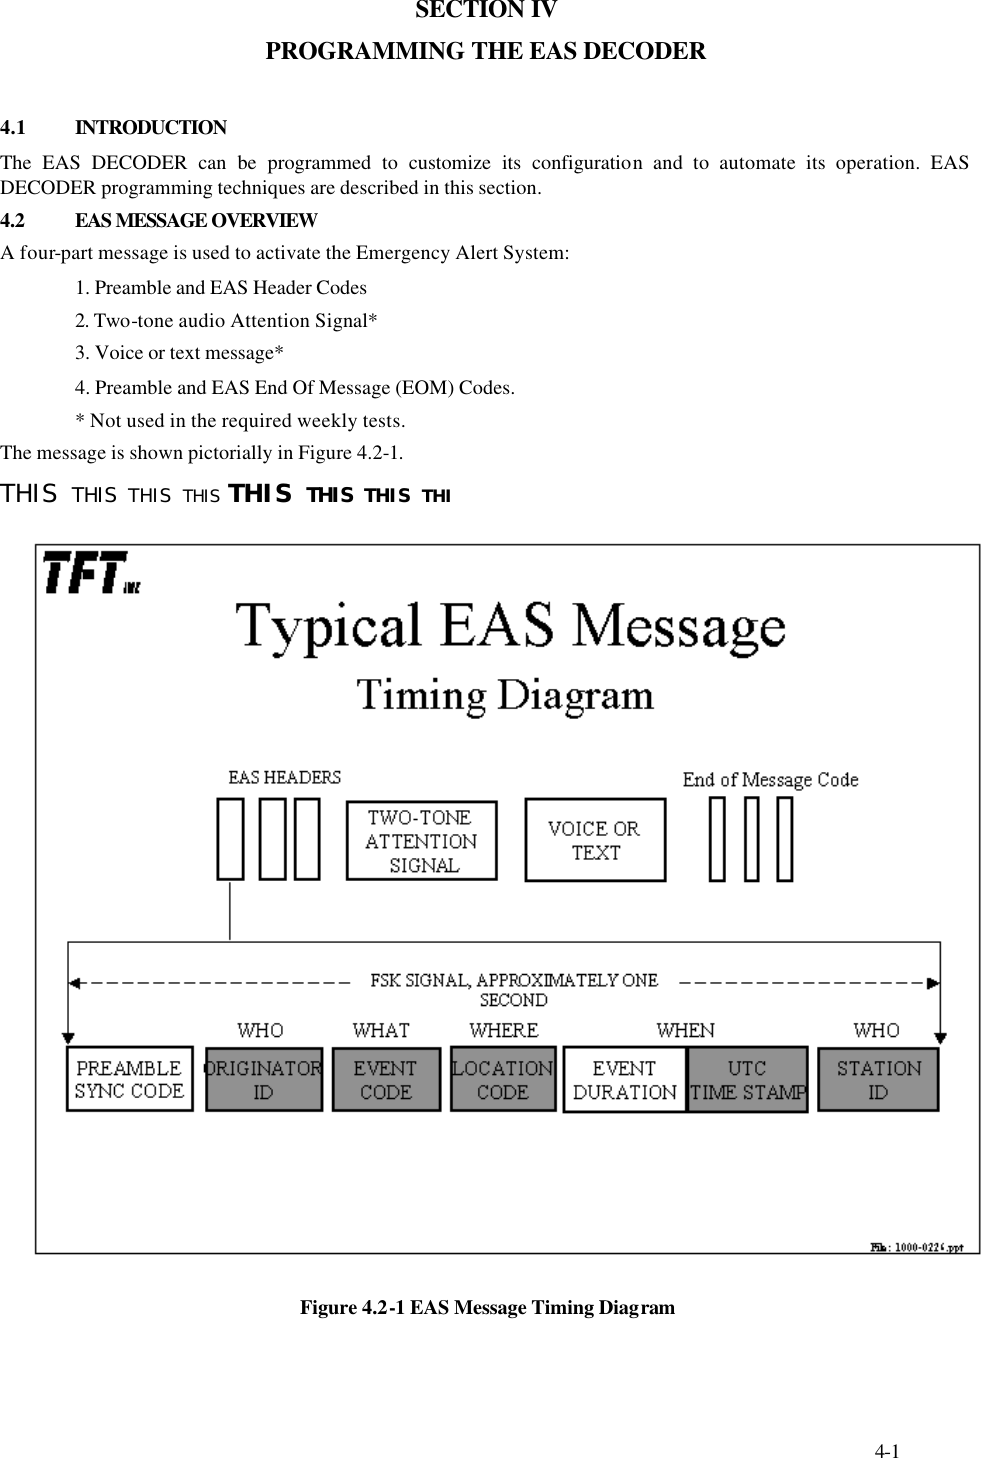     4-1 SECTION IV PROGRAMMING THE EAS DECODER  4.1  INTRODUCTION  The EAS DECODER can be programmed to customize its configuration and to automate its operation. EAS DECODER programming techniques are described in this section.  4.2 EAS MESSAGE OVERVIEW A four-part message is used to activate the Emergency Alert System: 1. Preamble and EAS Header Codes 2. Two-tone audio Attention Signal* 3. Voice or text message* 4. Preamble and EAS End Of Message (EOM) Codes.  * Not used in the required weekly tests. The message is shown pictorially in Figure 4.2-1. THIS  THIS  THIS  THIS  THIS  THIS  THIS  THI  Figure 4.2-1 EAS Message Timing Diagram  